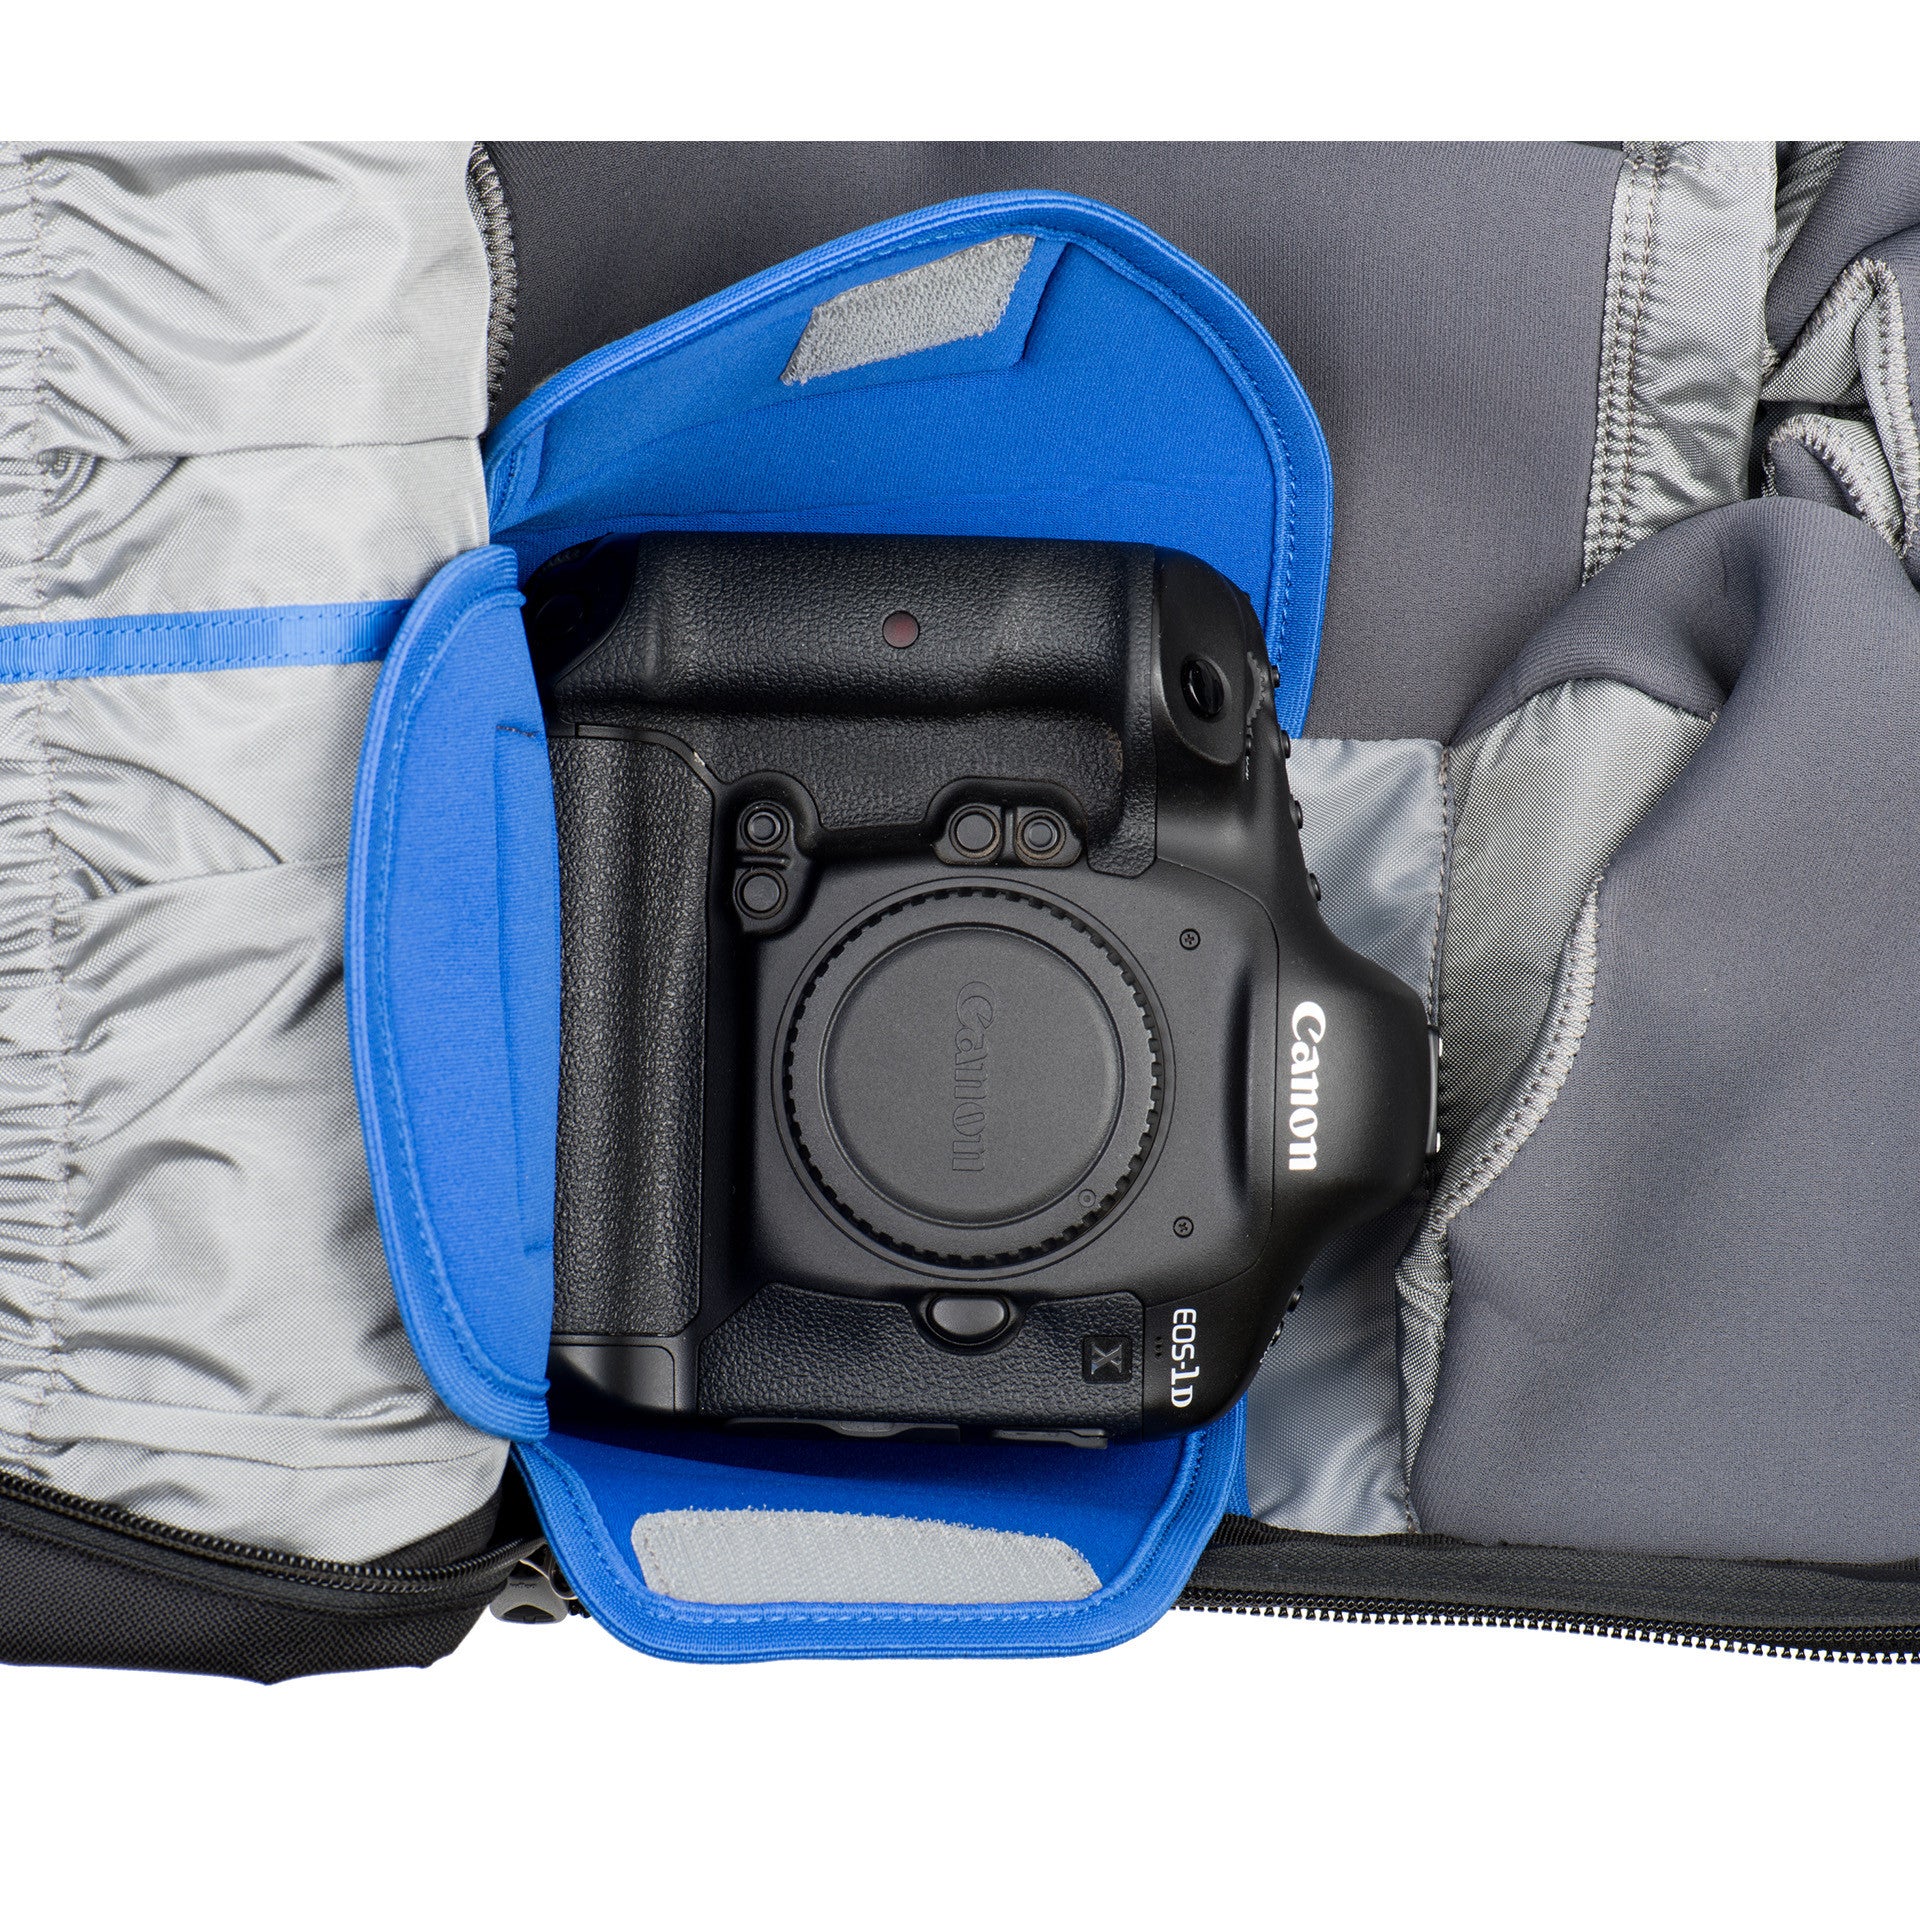 Neoprene pockets and wrap for cameras, lenses or personal items